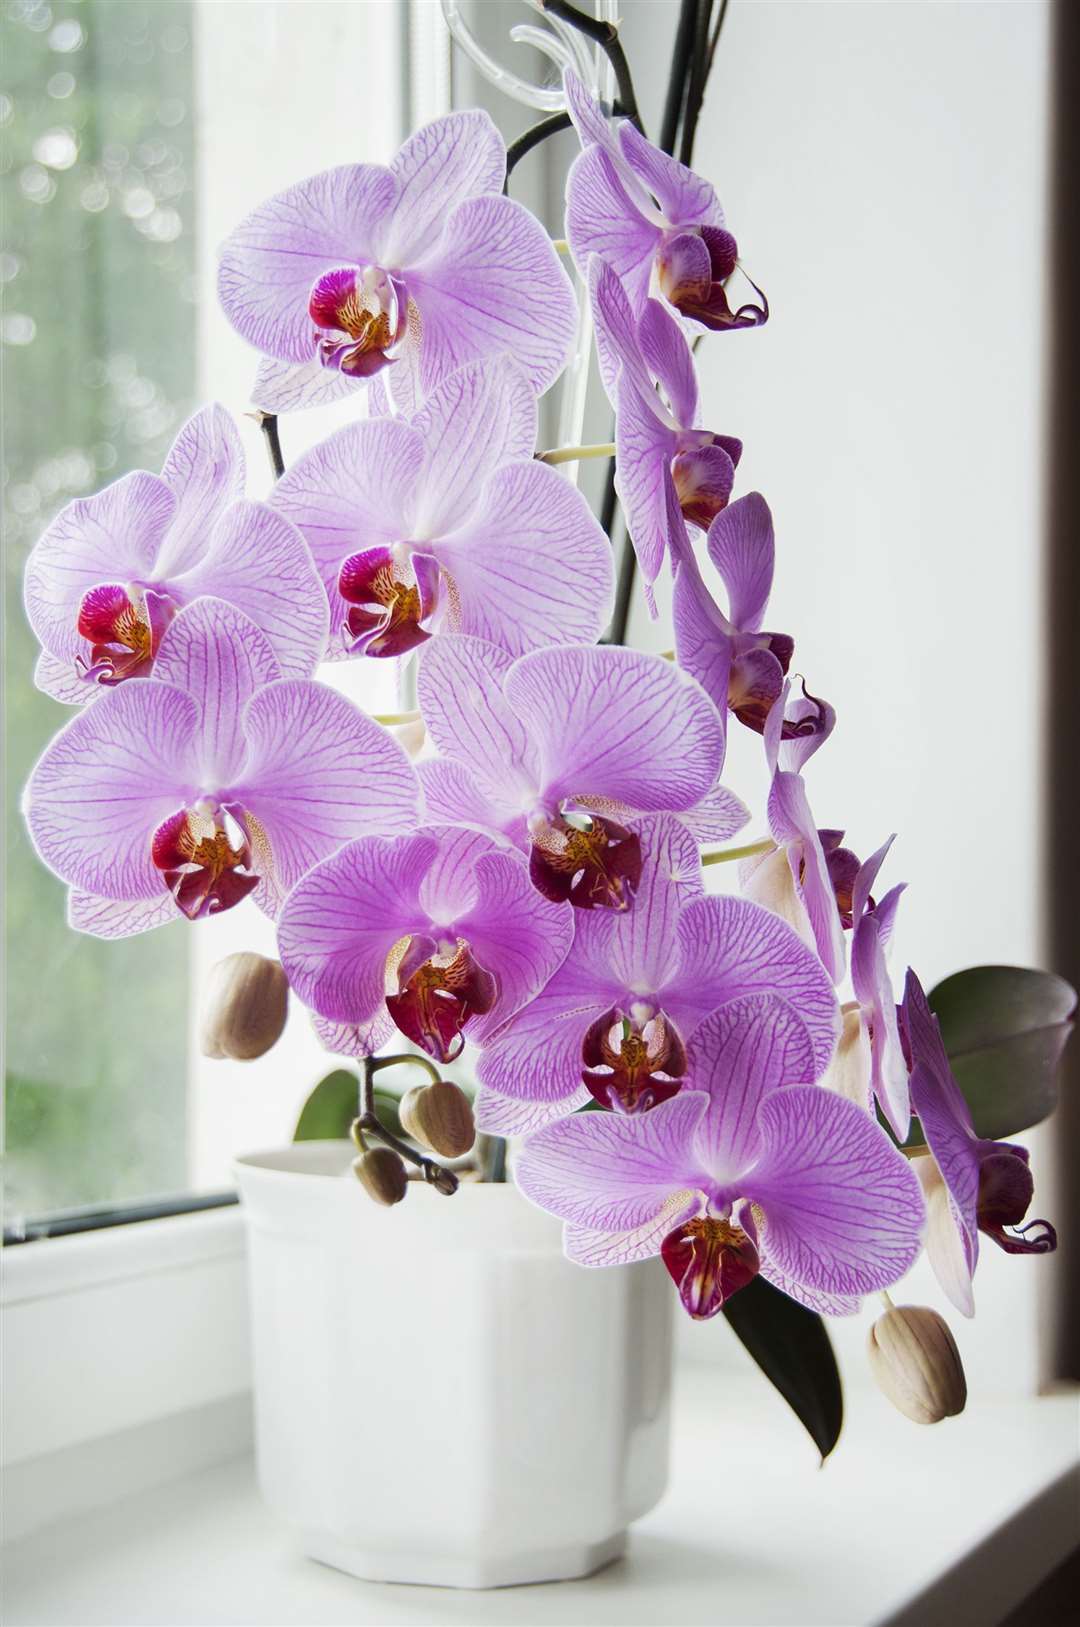 Phalaenopsis orchids can flower for months if cared for properly. Picture: iStock/PA